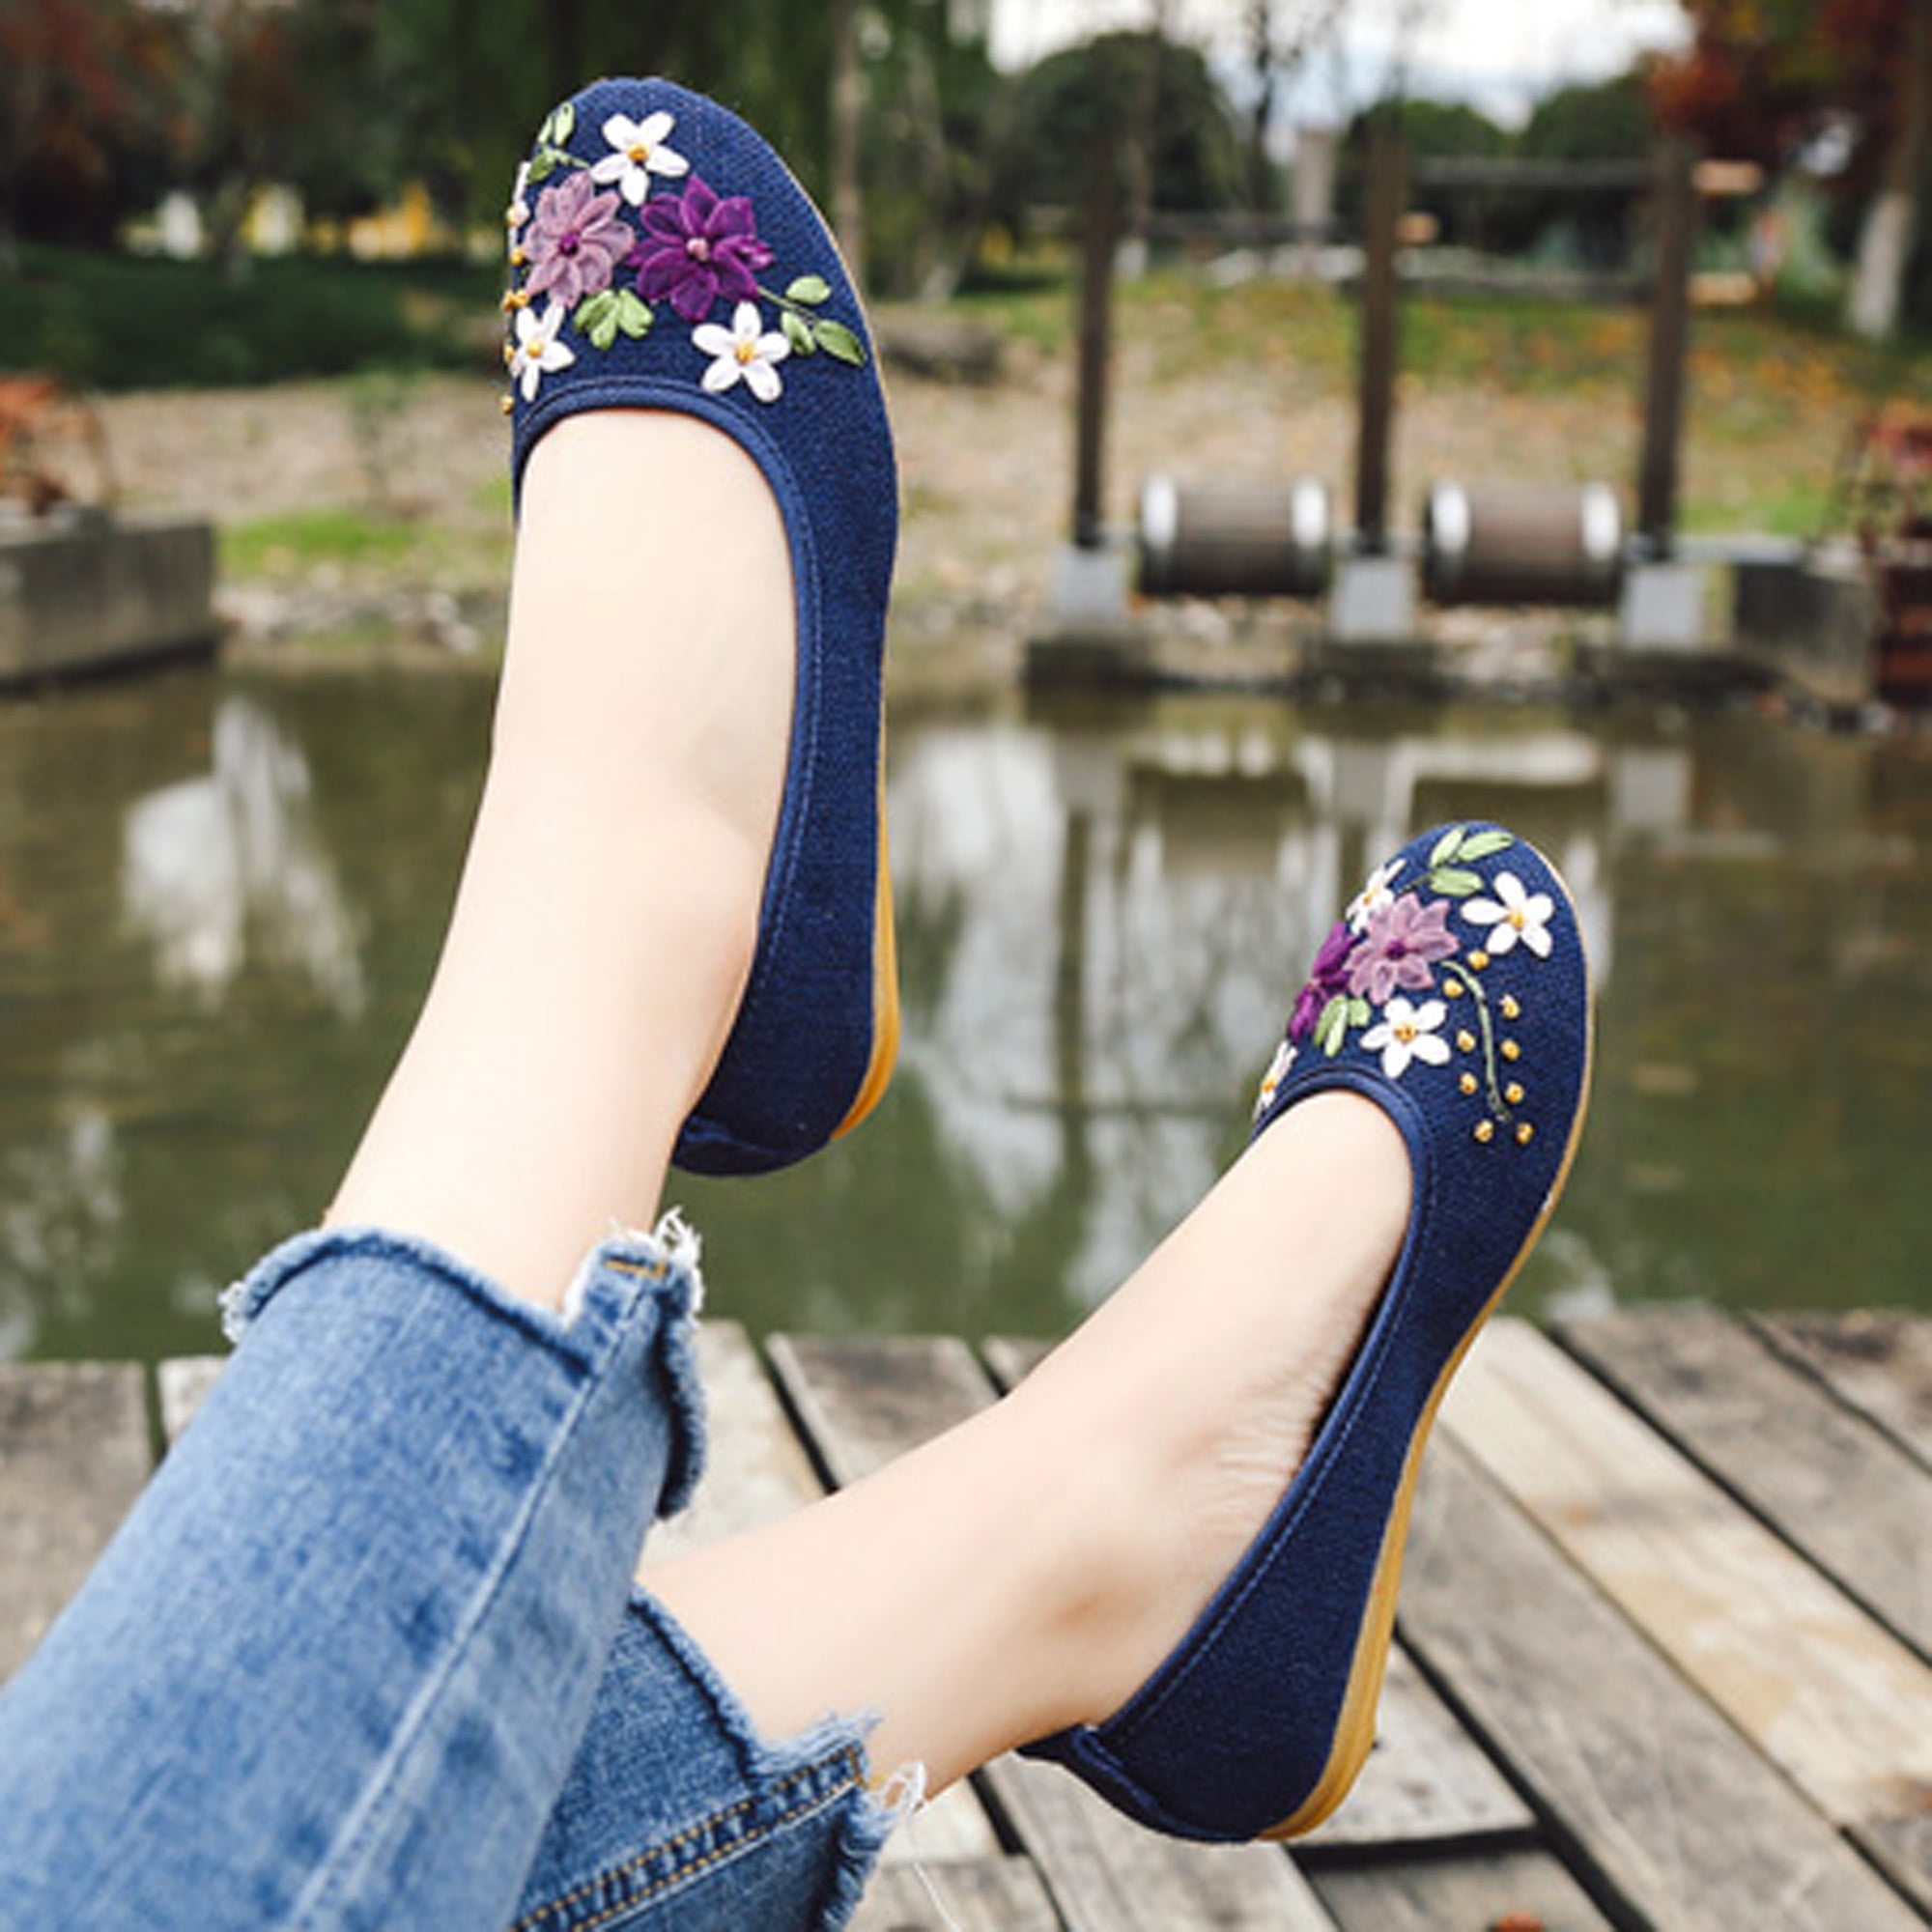 Women's Canvas Casual Flat Shoes Beaded Floral Round Toe Loafers Comfy Walking 